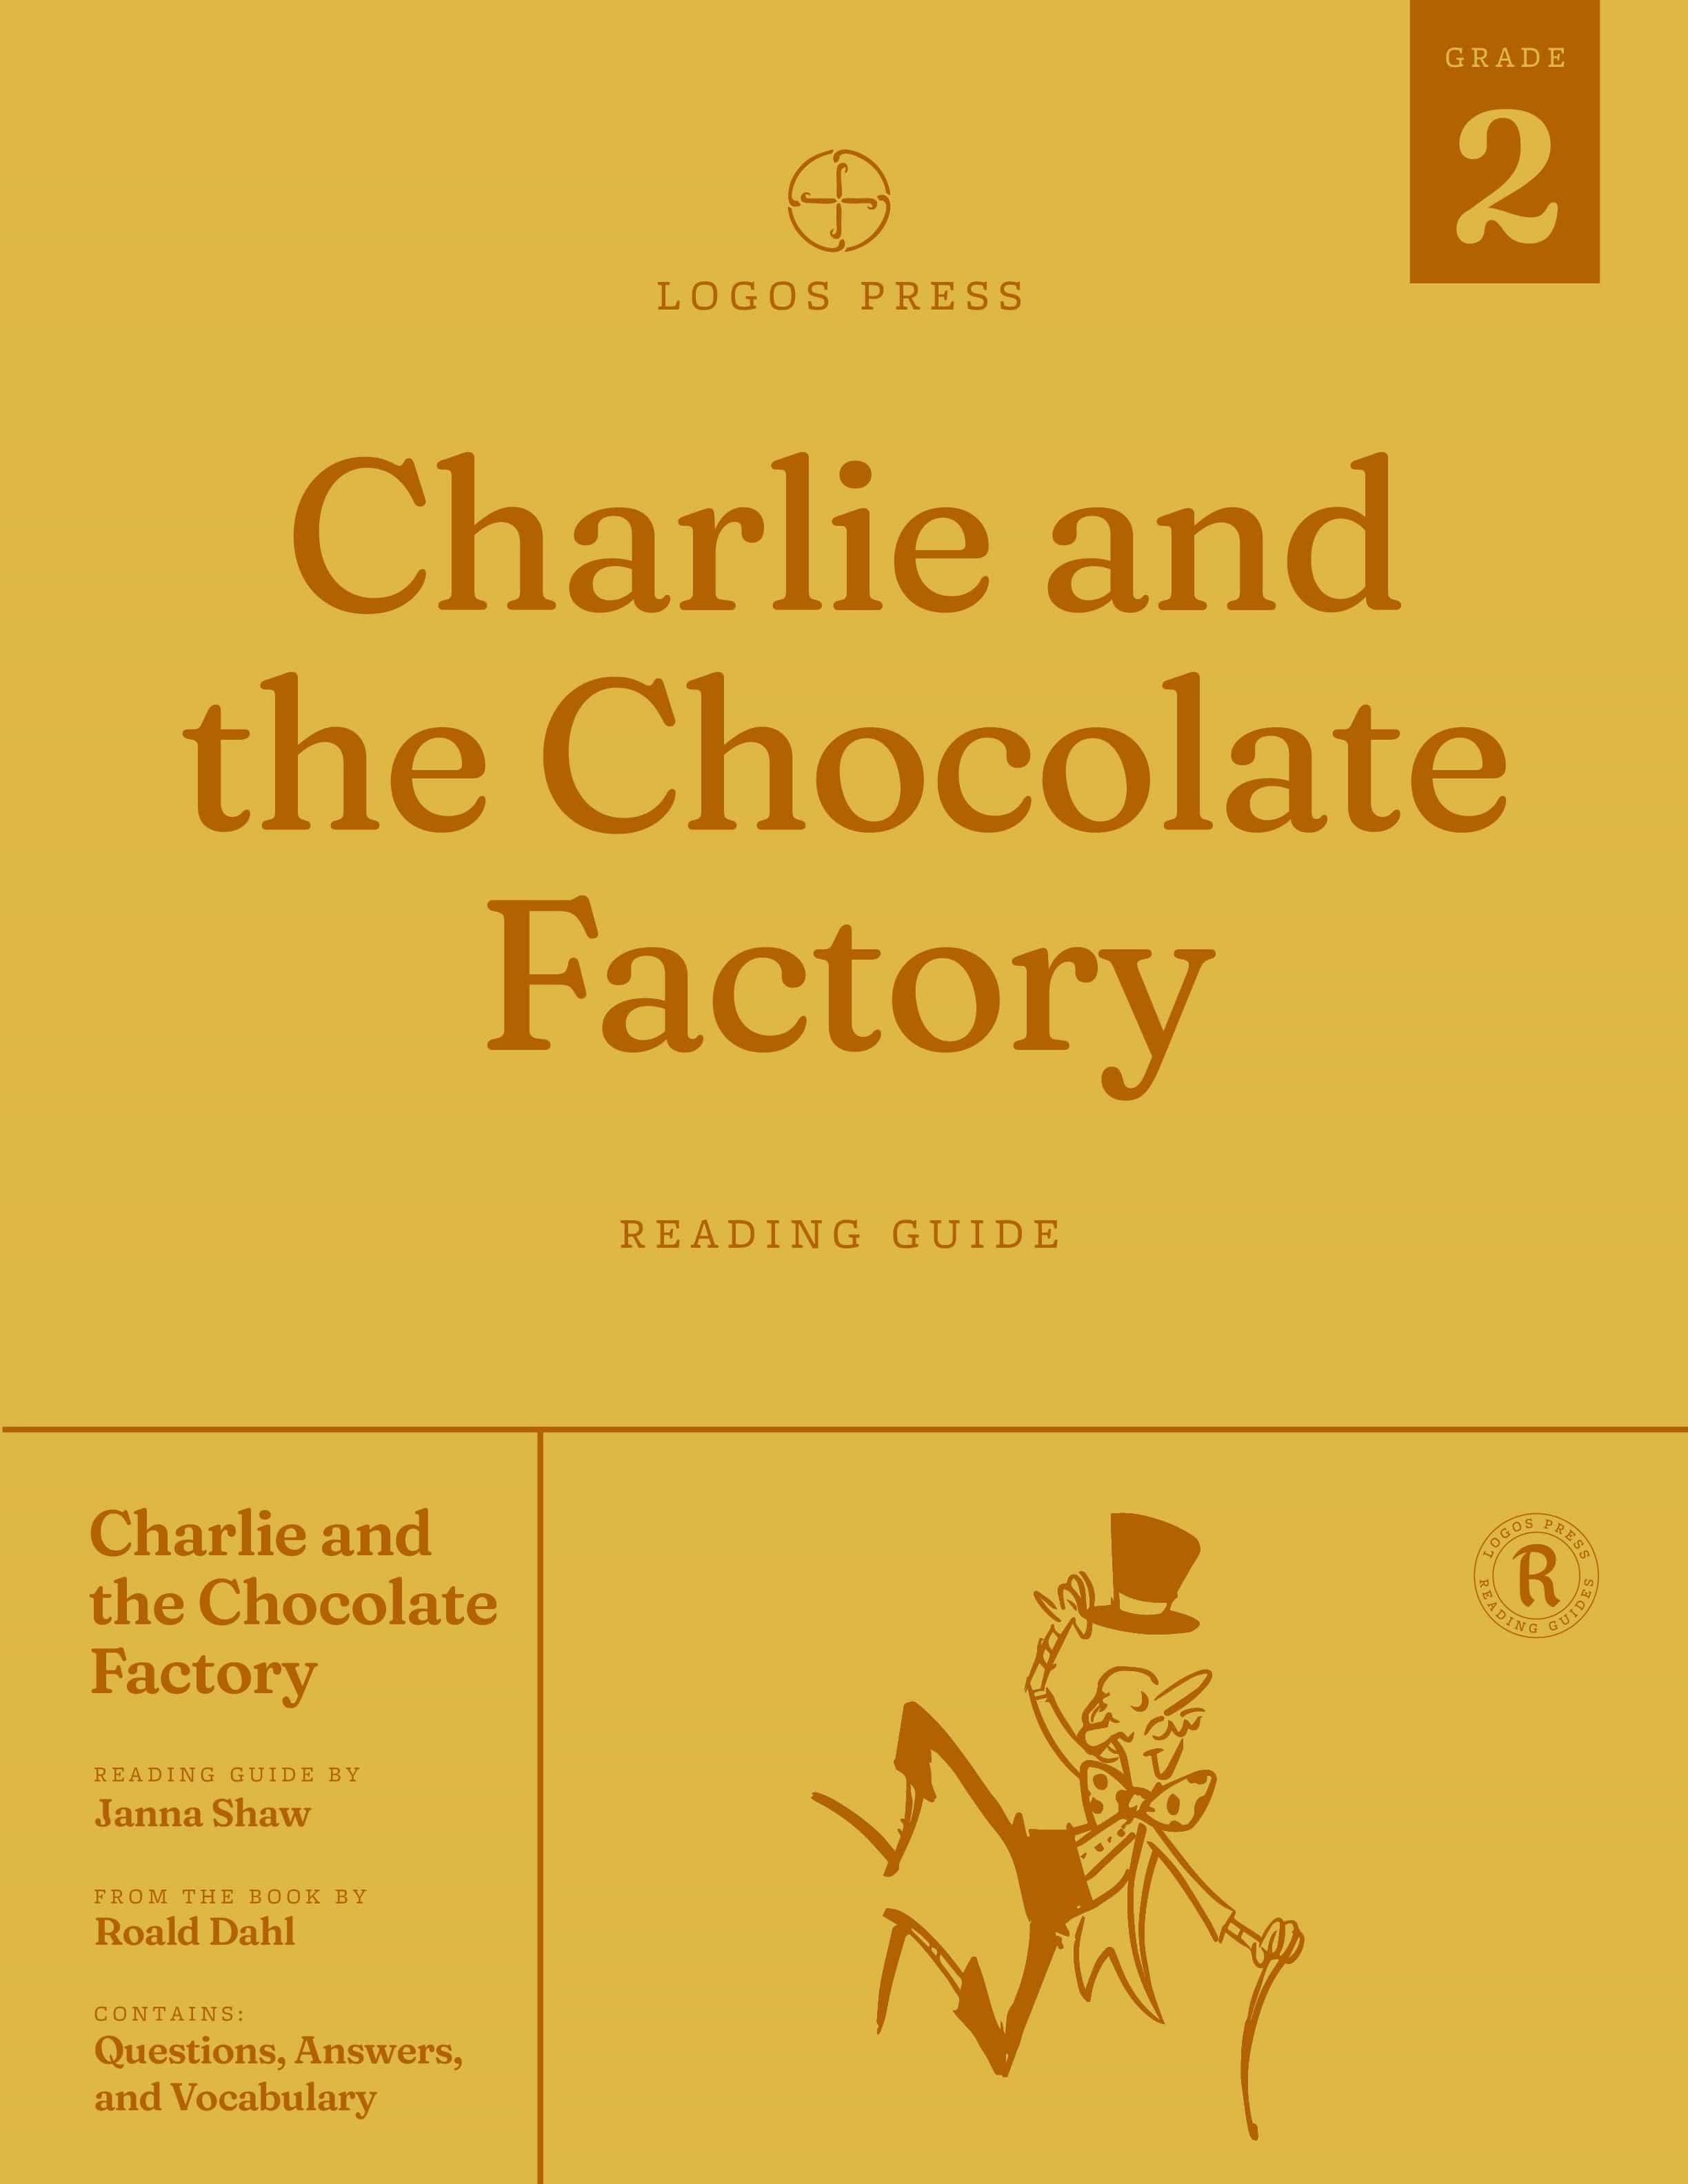 Charlie and the Chocolate Factory - Reading Guide (Download)